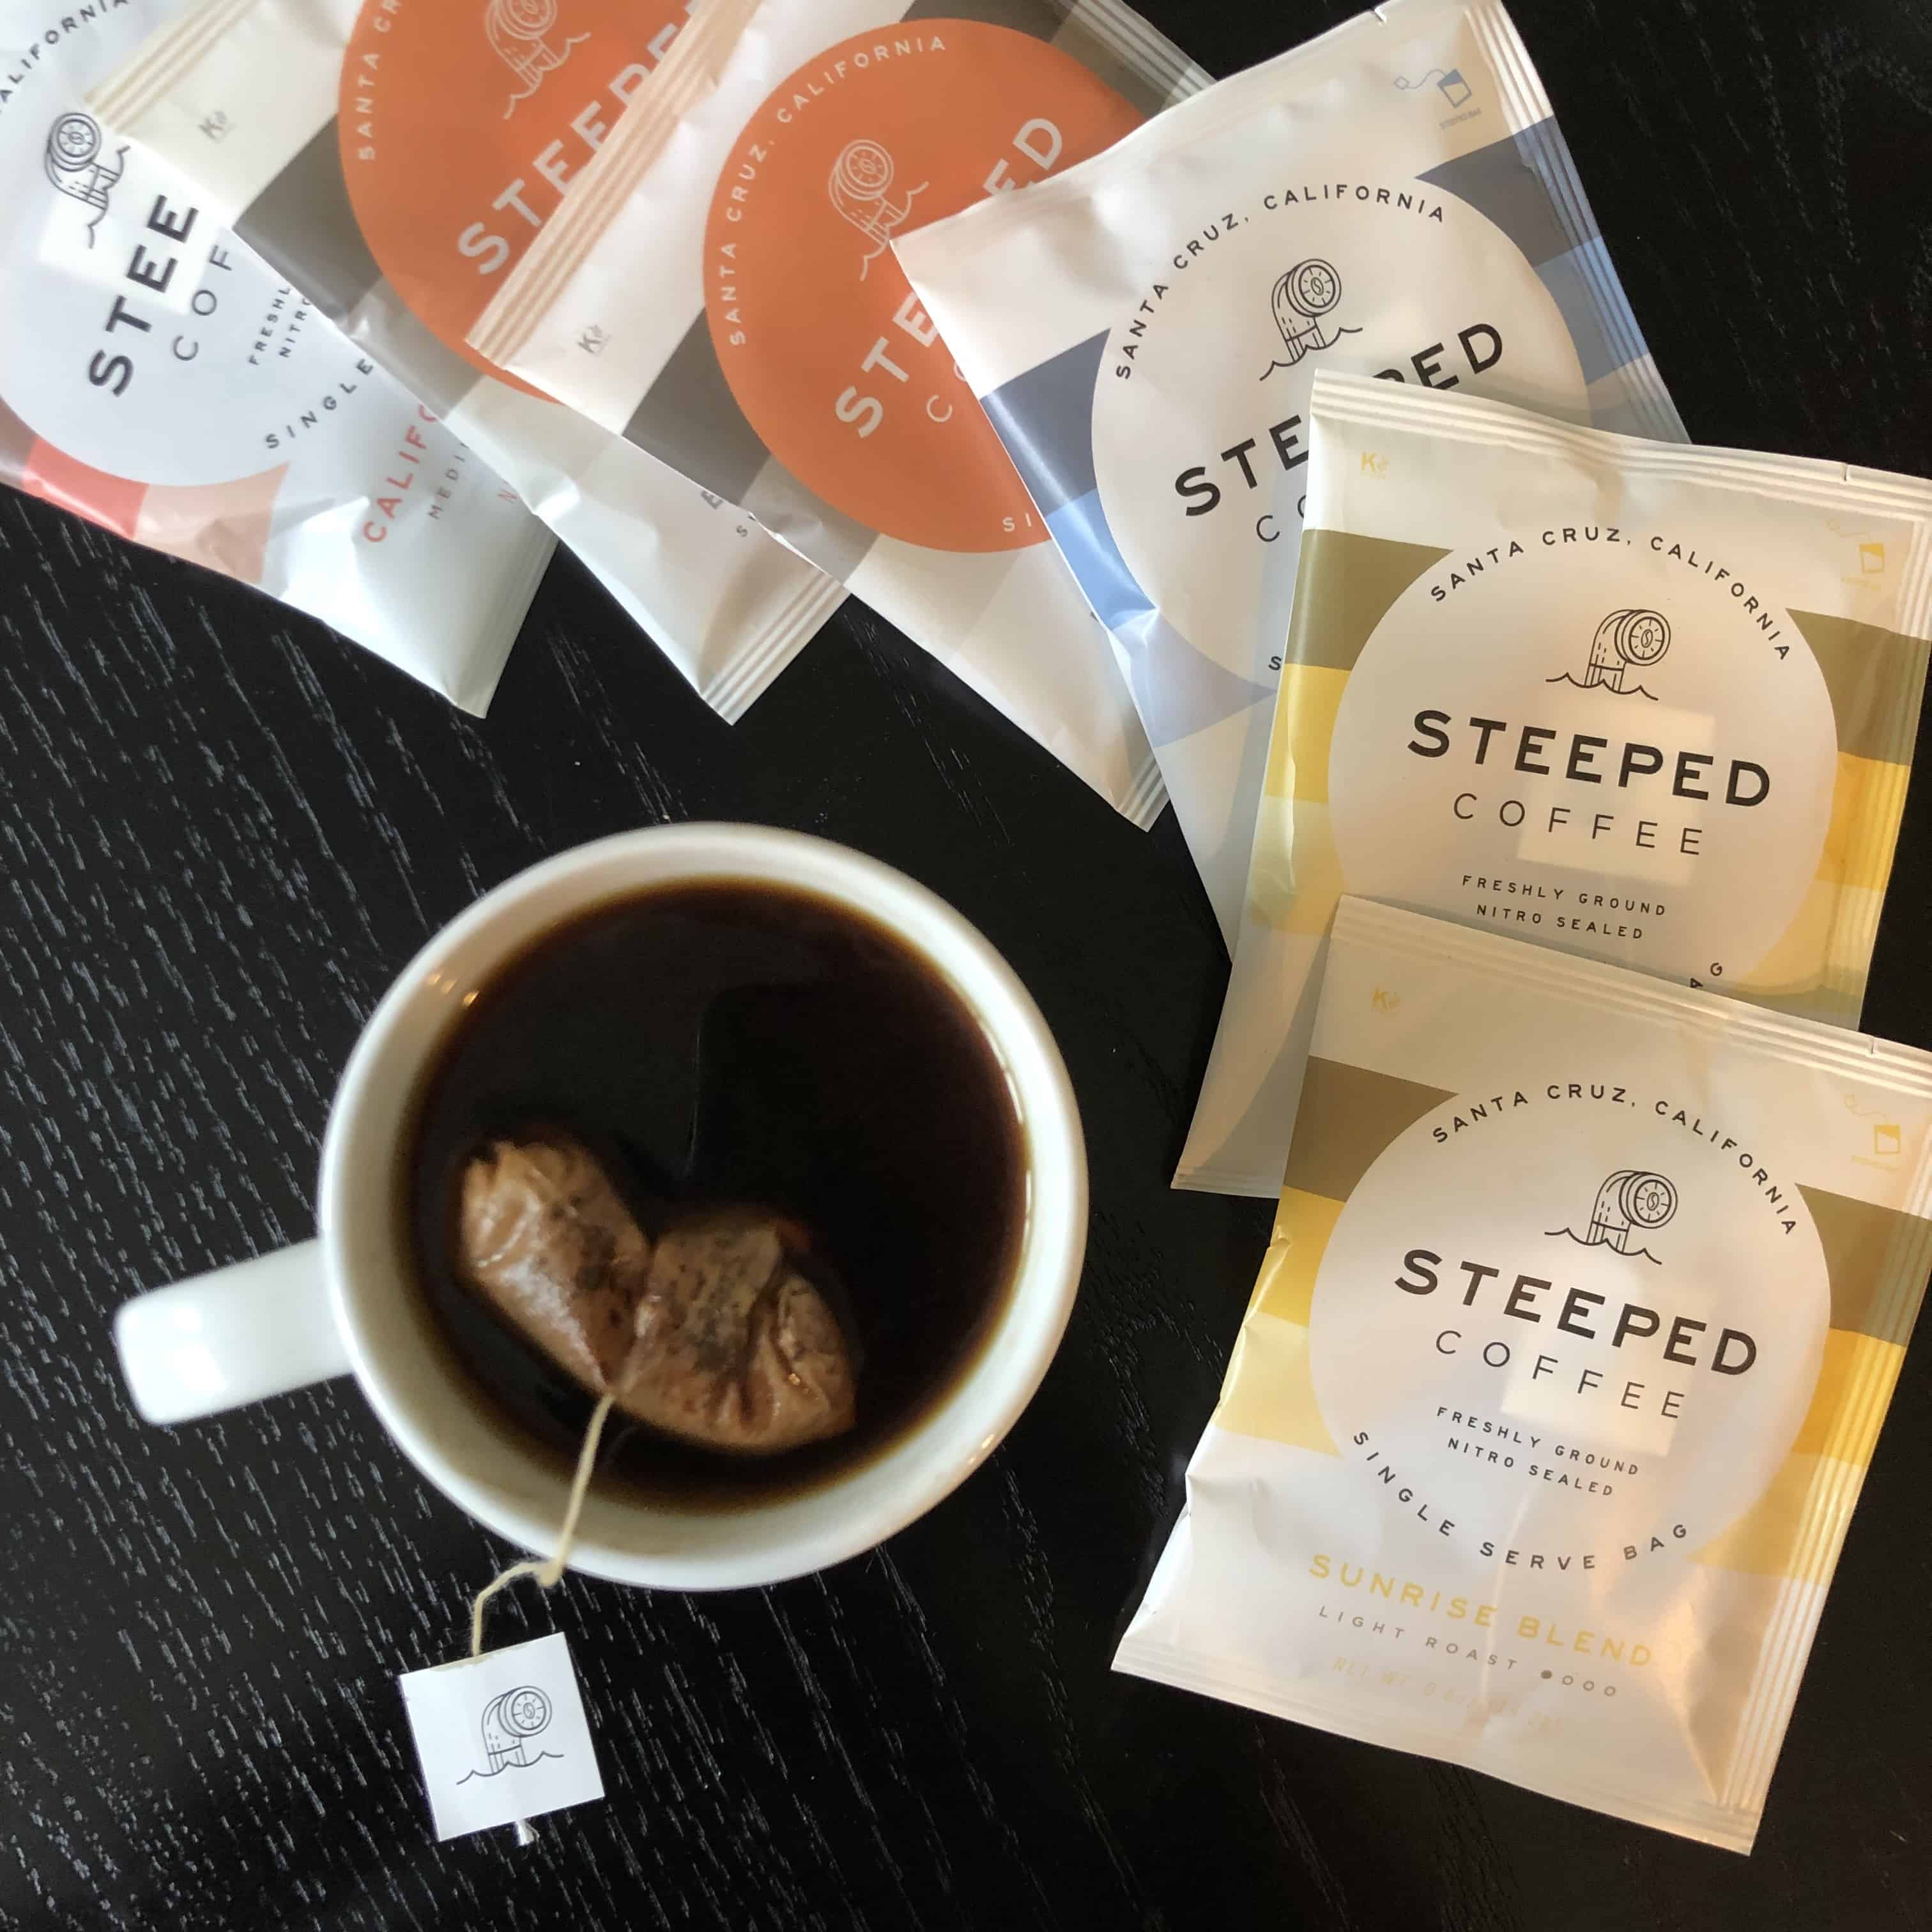 Introducing Steeped Specialty Coffee in a SingleServe